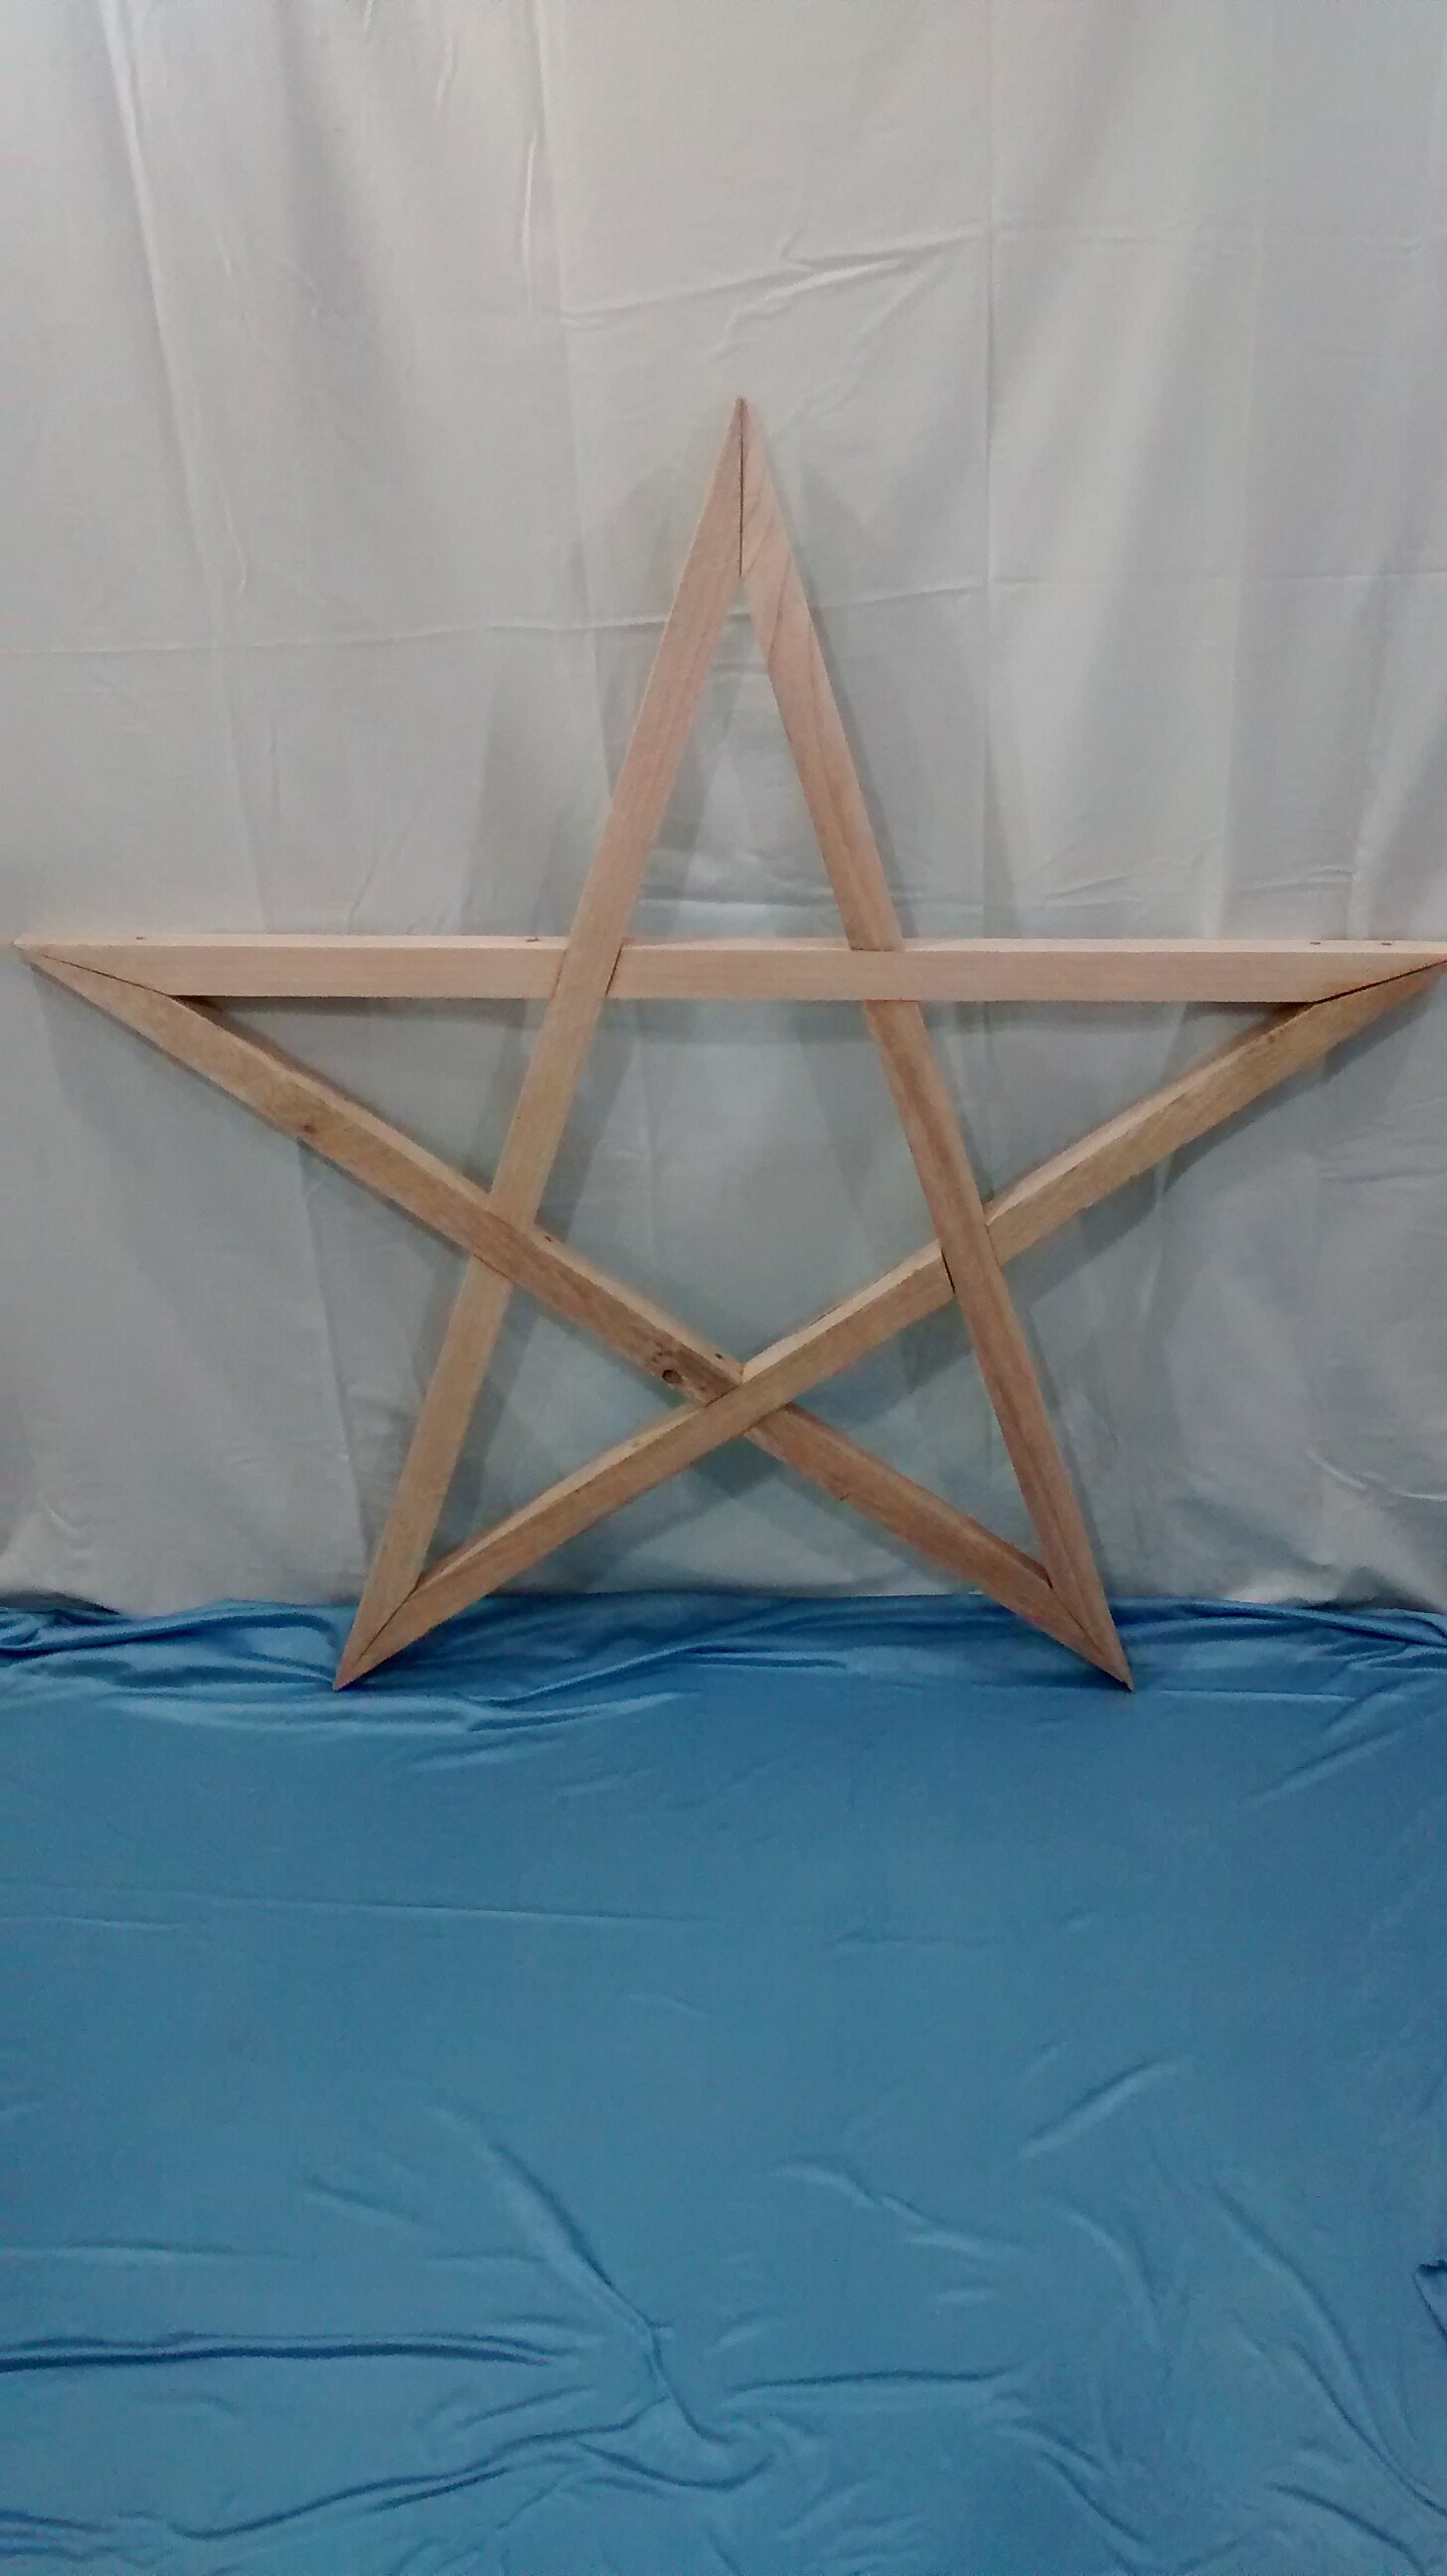 Rough and Rustic Reclaimed Wood Star #1